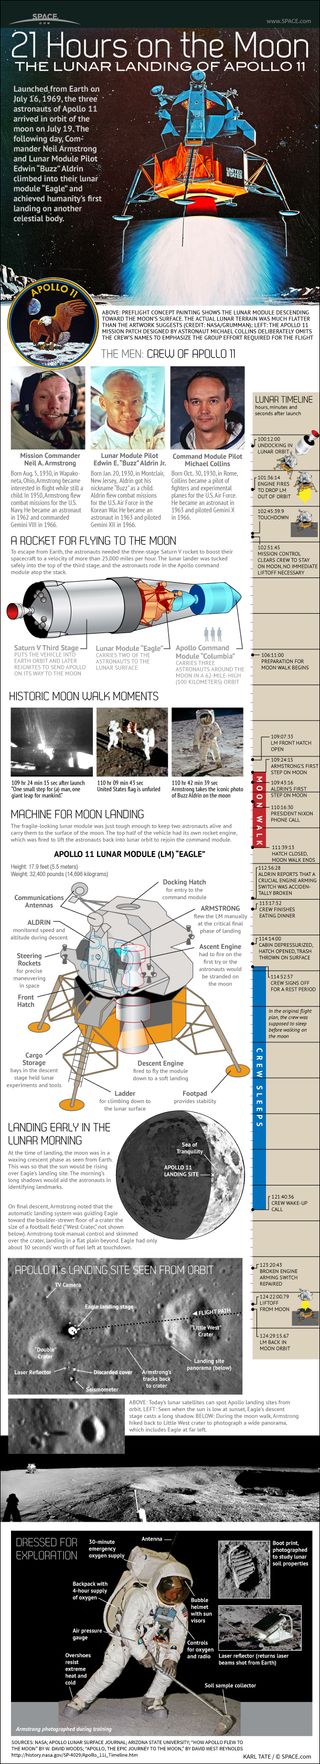 NASA's Apollo 11 mission landed the first astronauts on the moon on July 20, 1969. See how it worked.